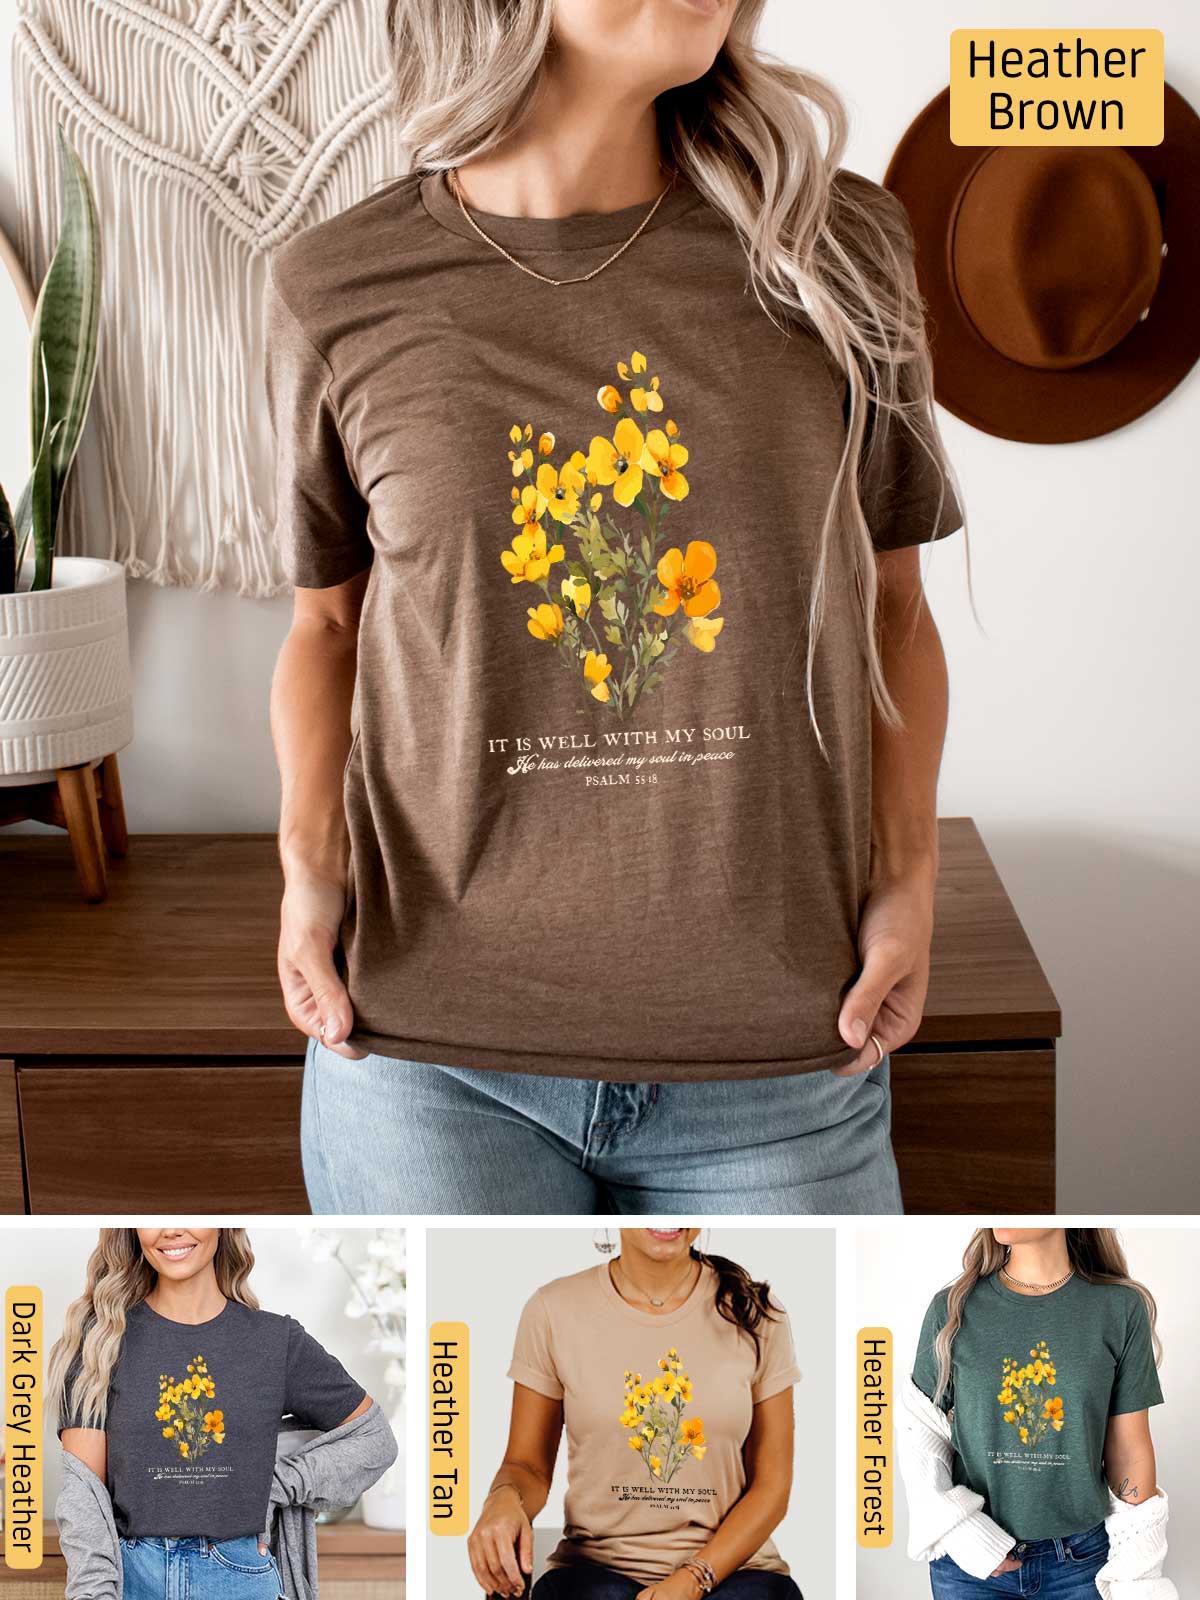 a woman wearing a brown shirt with yellow flowers on it